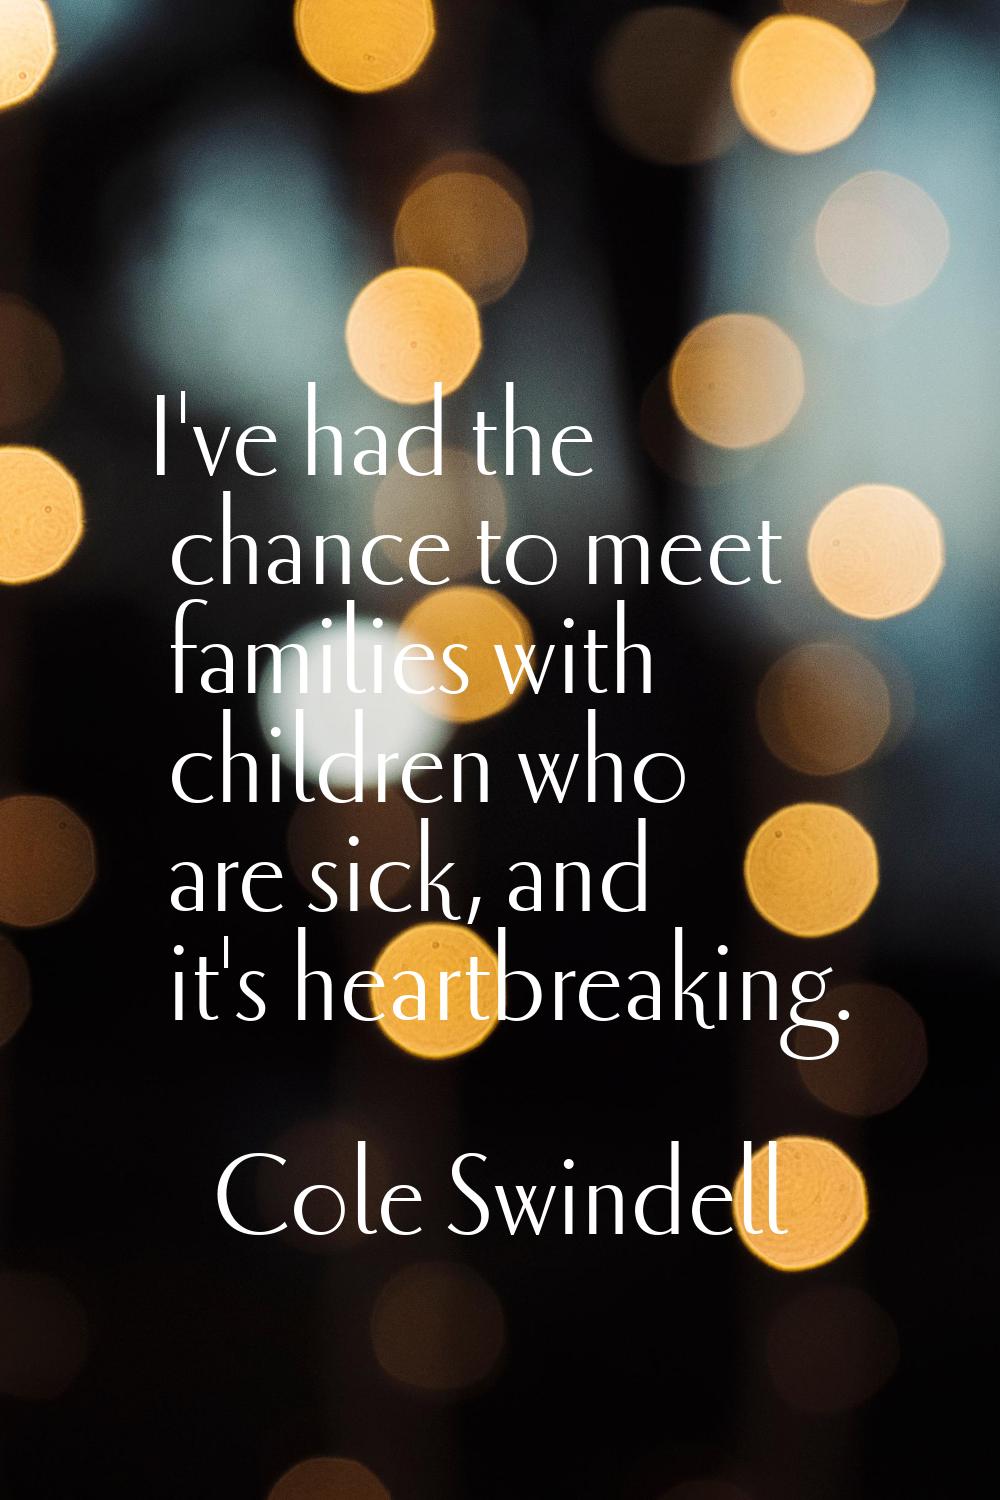 I've had the chance to meet families with children who are sick, and it's heartbreaking.